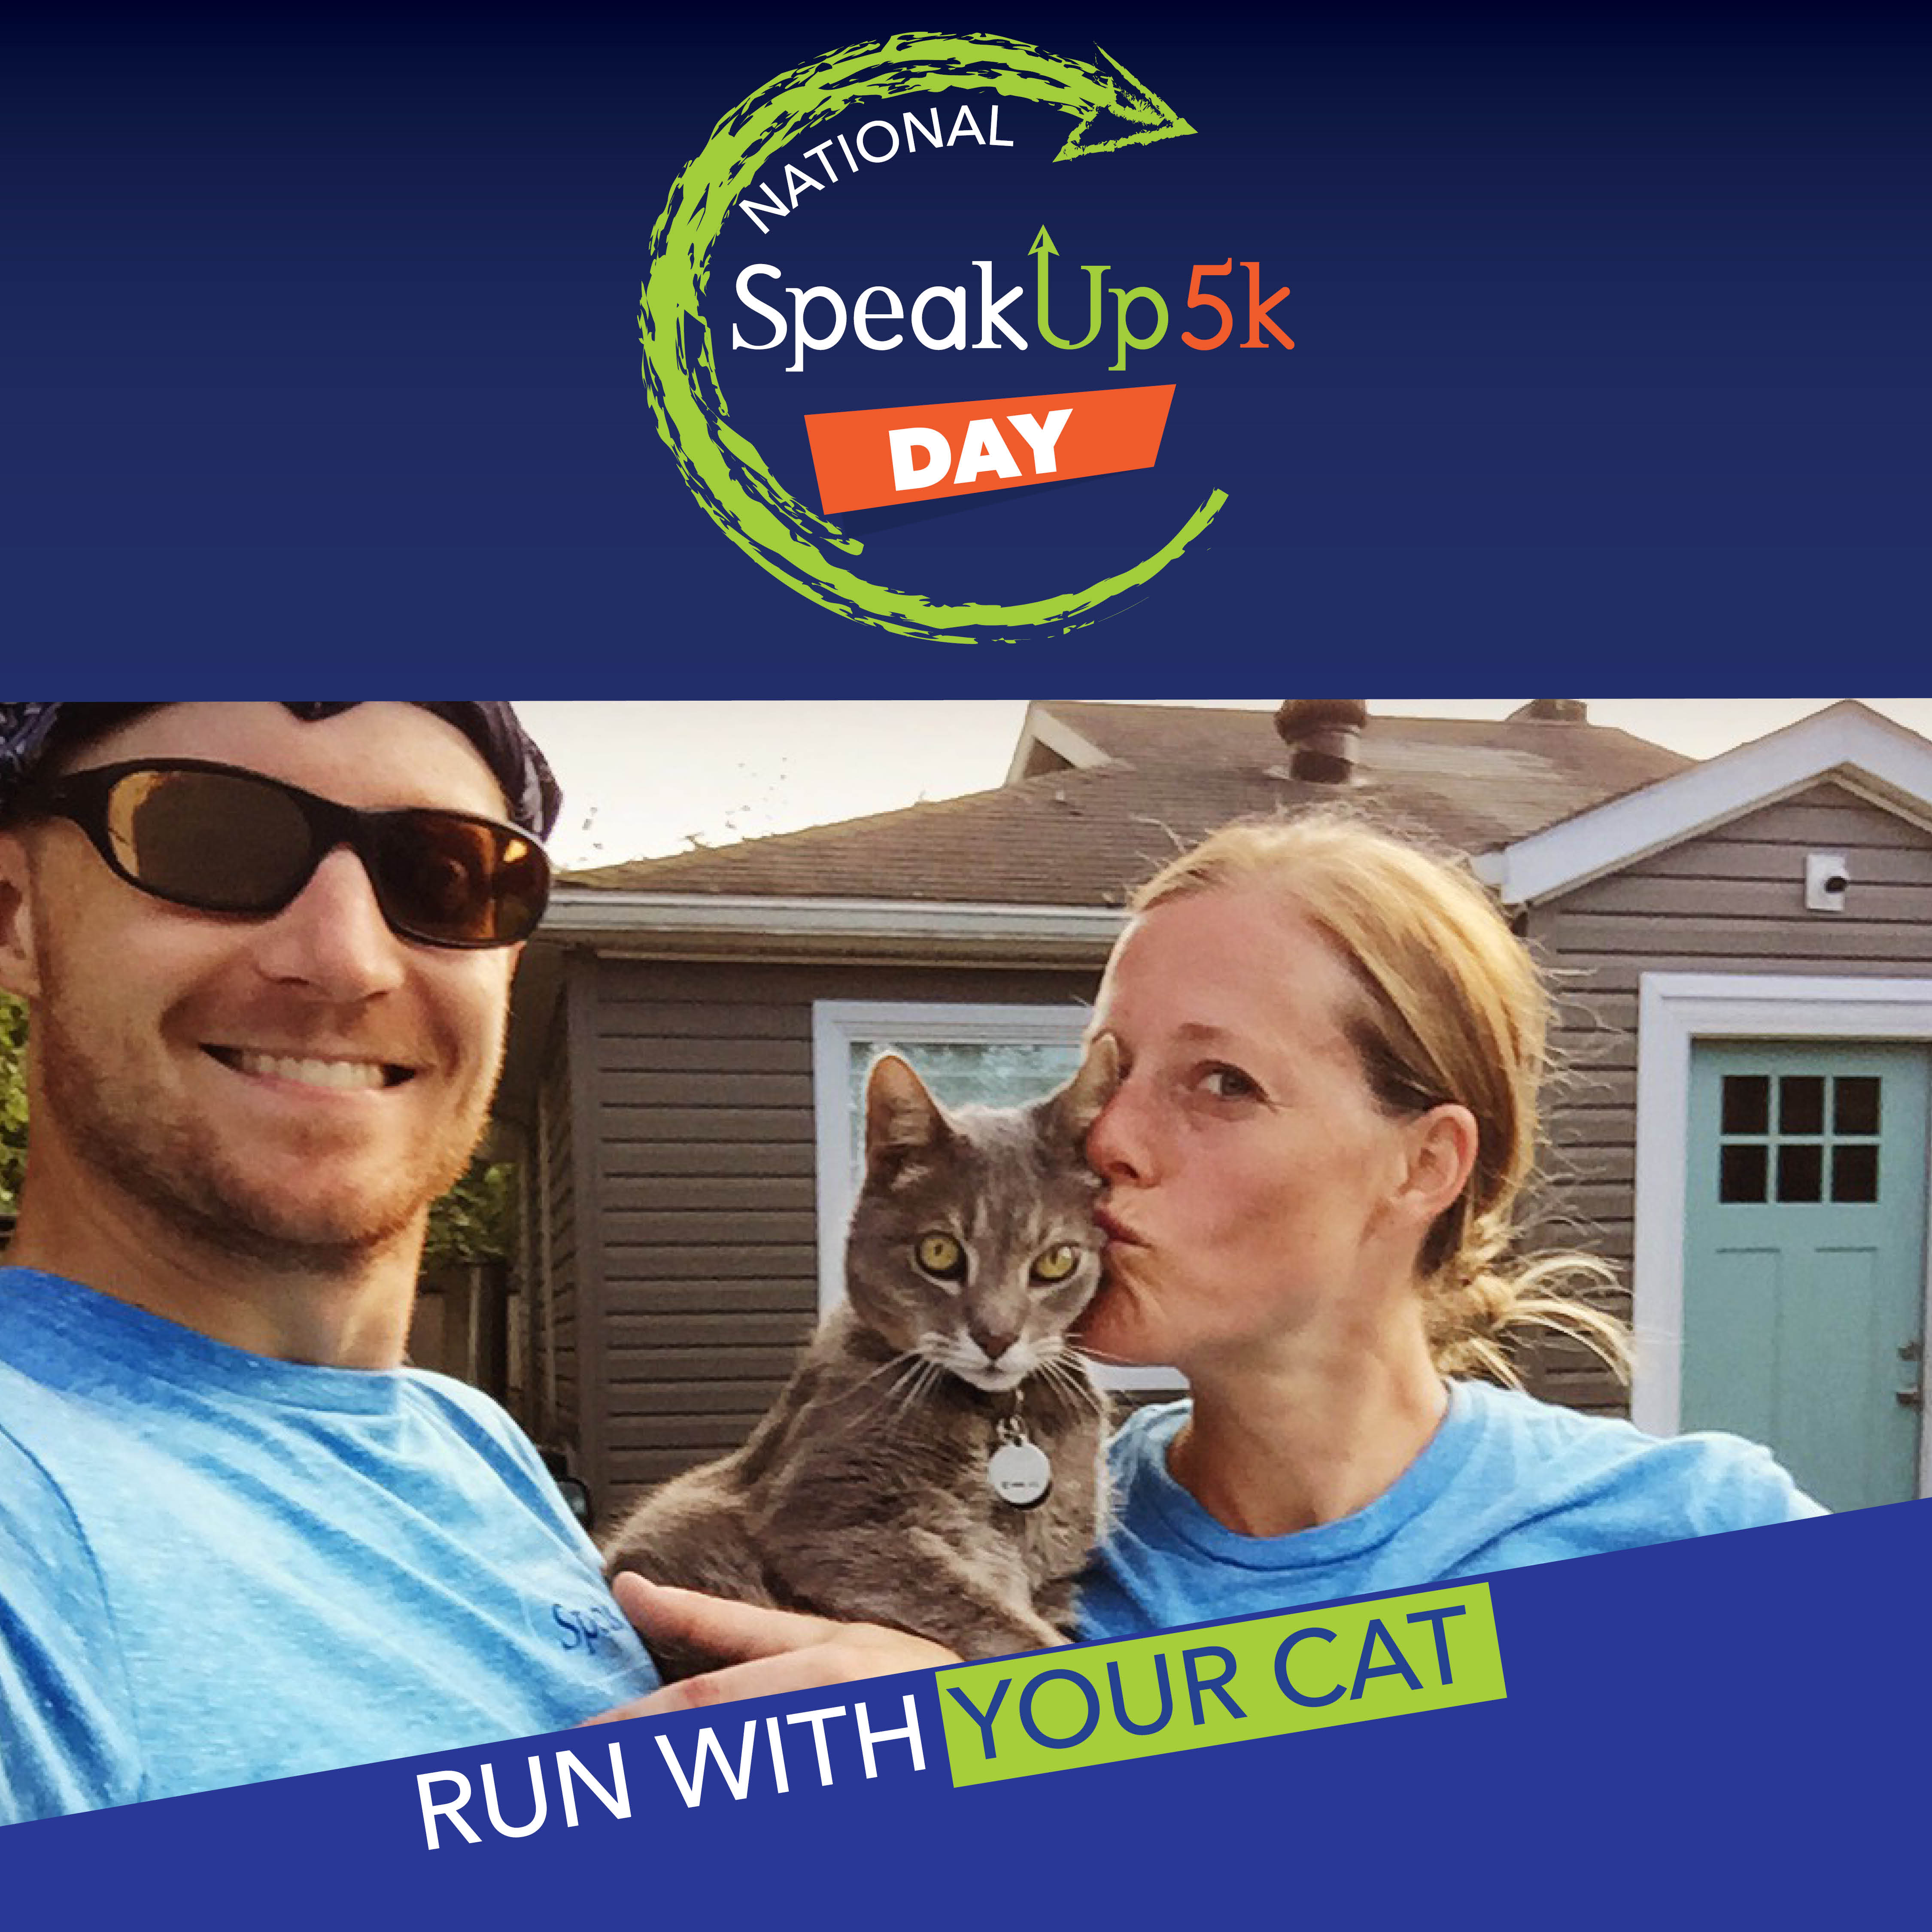 Run With Your Cat, Stroll With Your Kids to Raise Awareness About Teen Anxiety and Depression